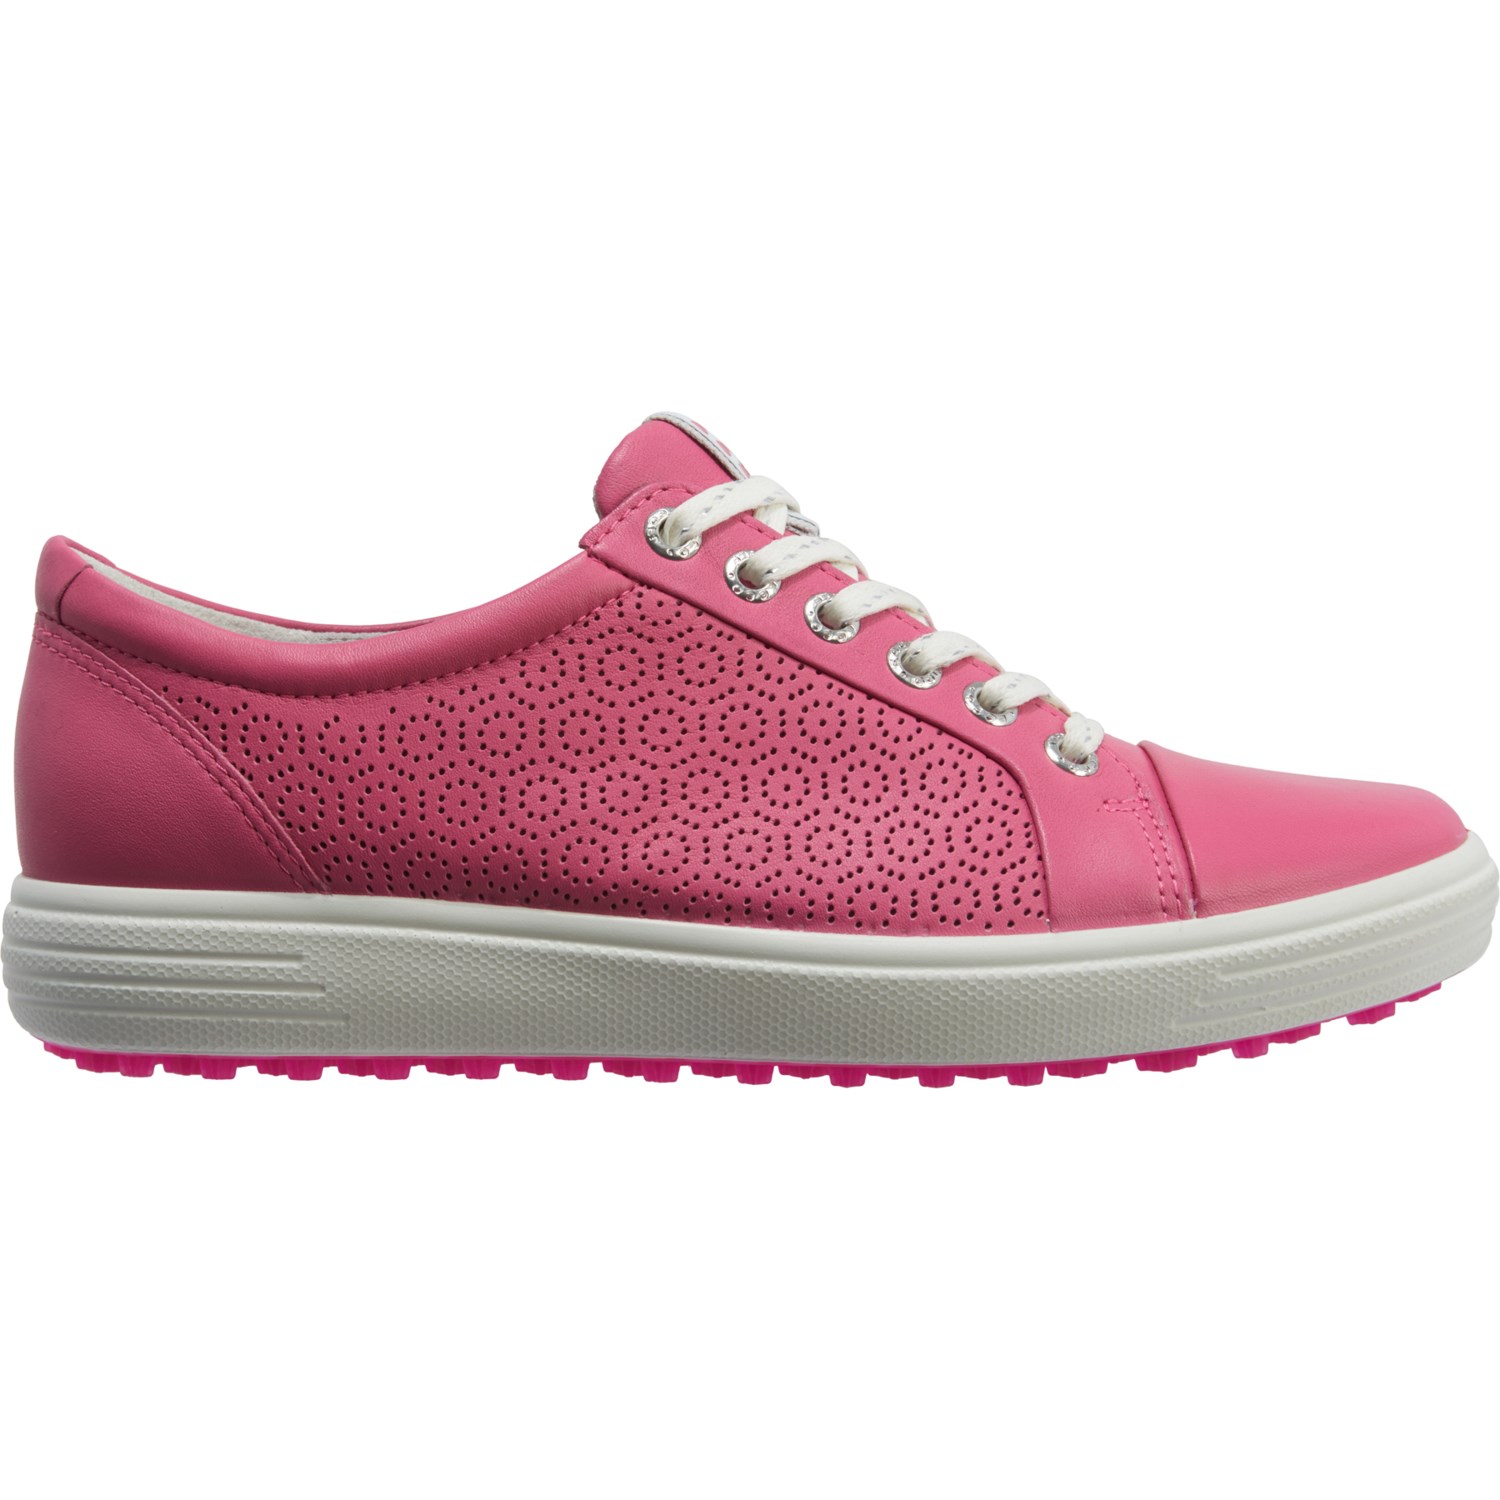 pink ecco shoes off 57% - www 